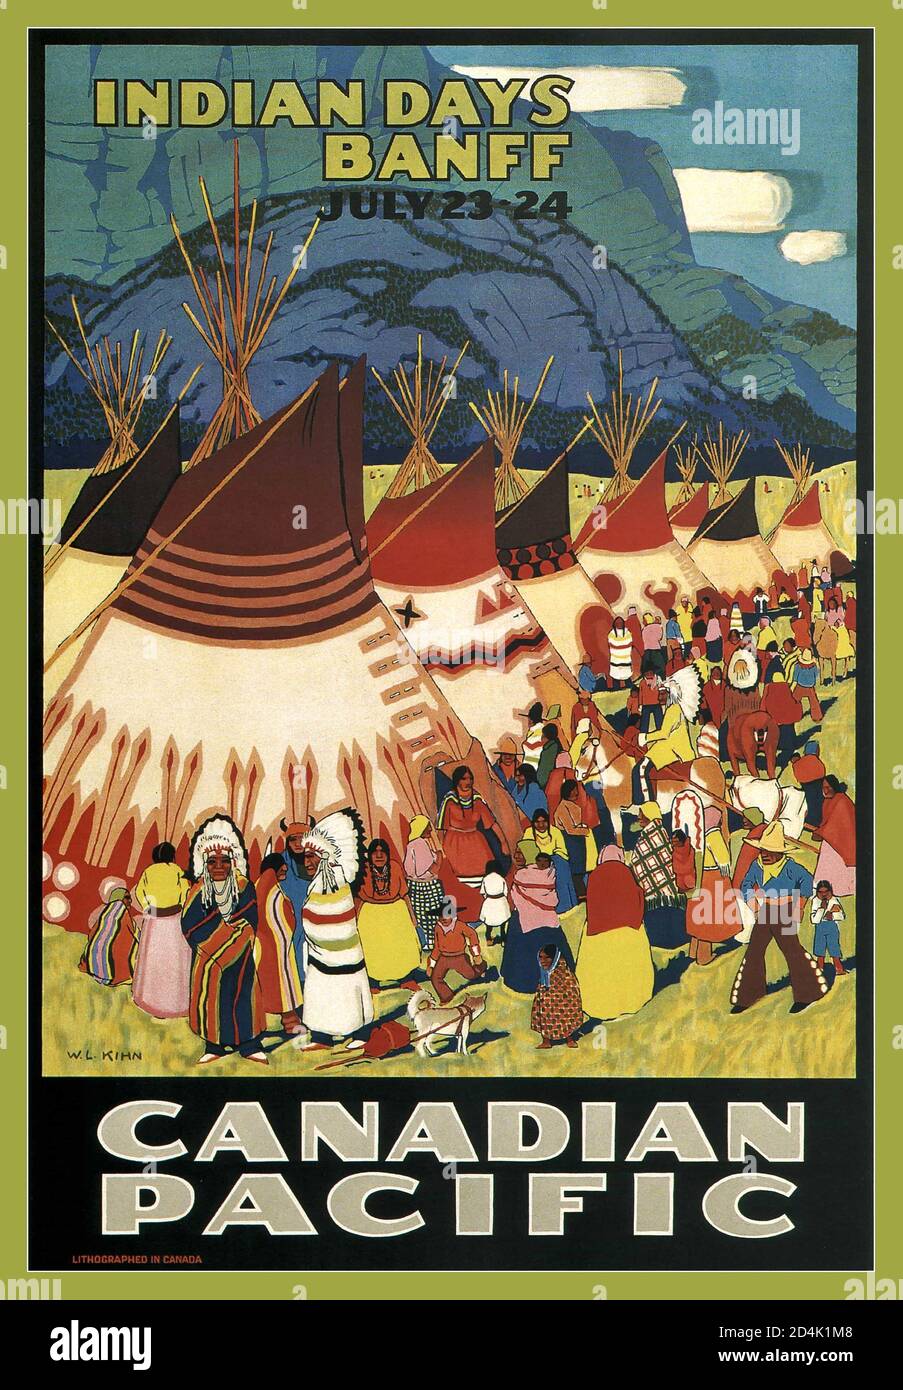 Canada Canadian Pacific Vintage Railway Travel Advertisement Poster 1925 Trans